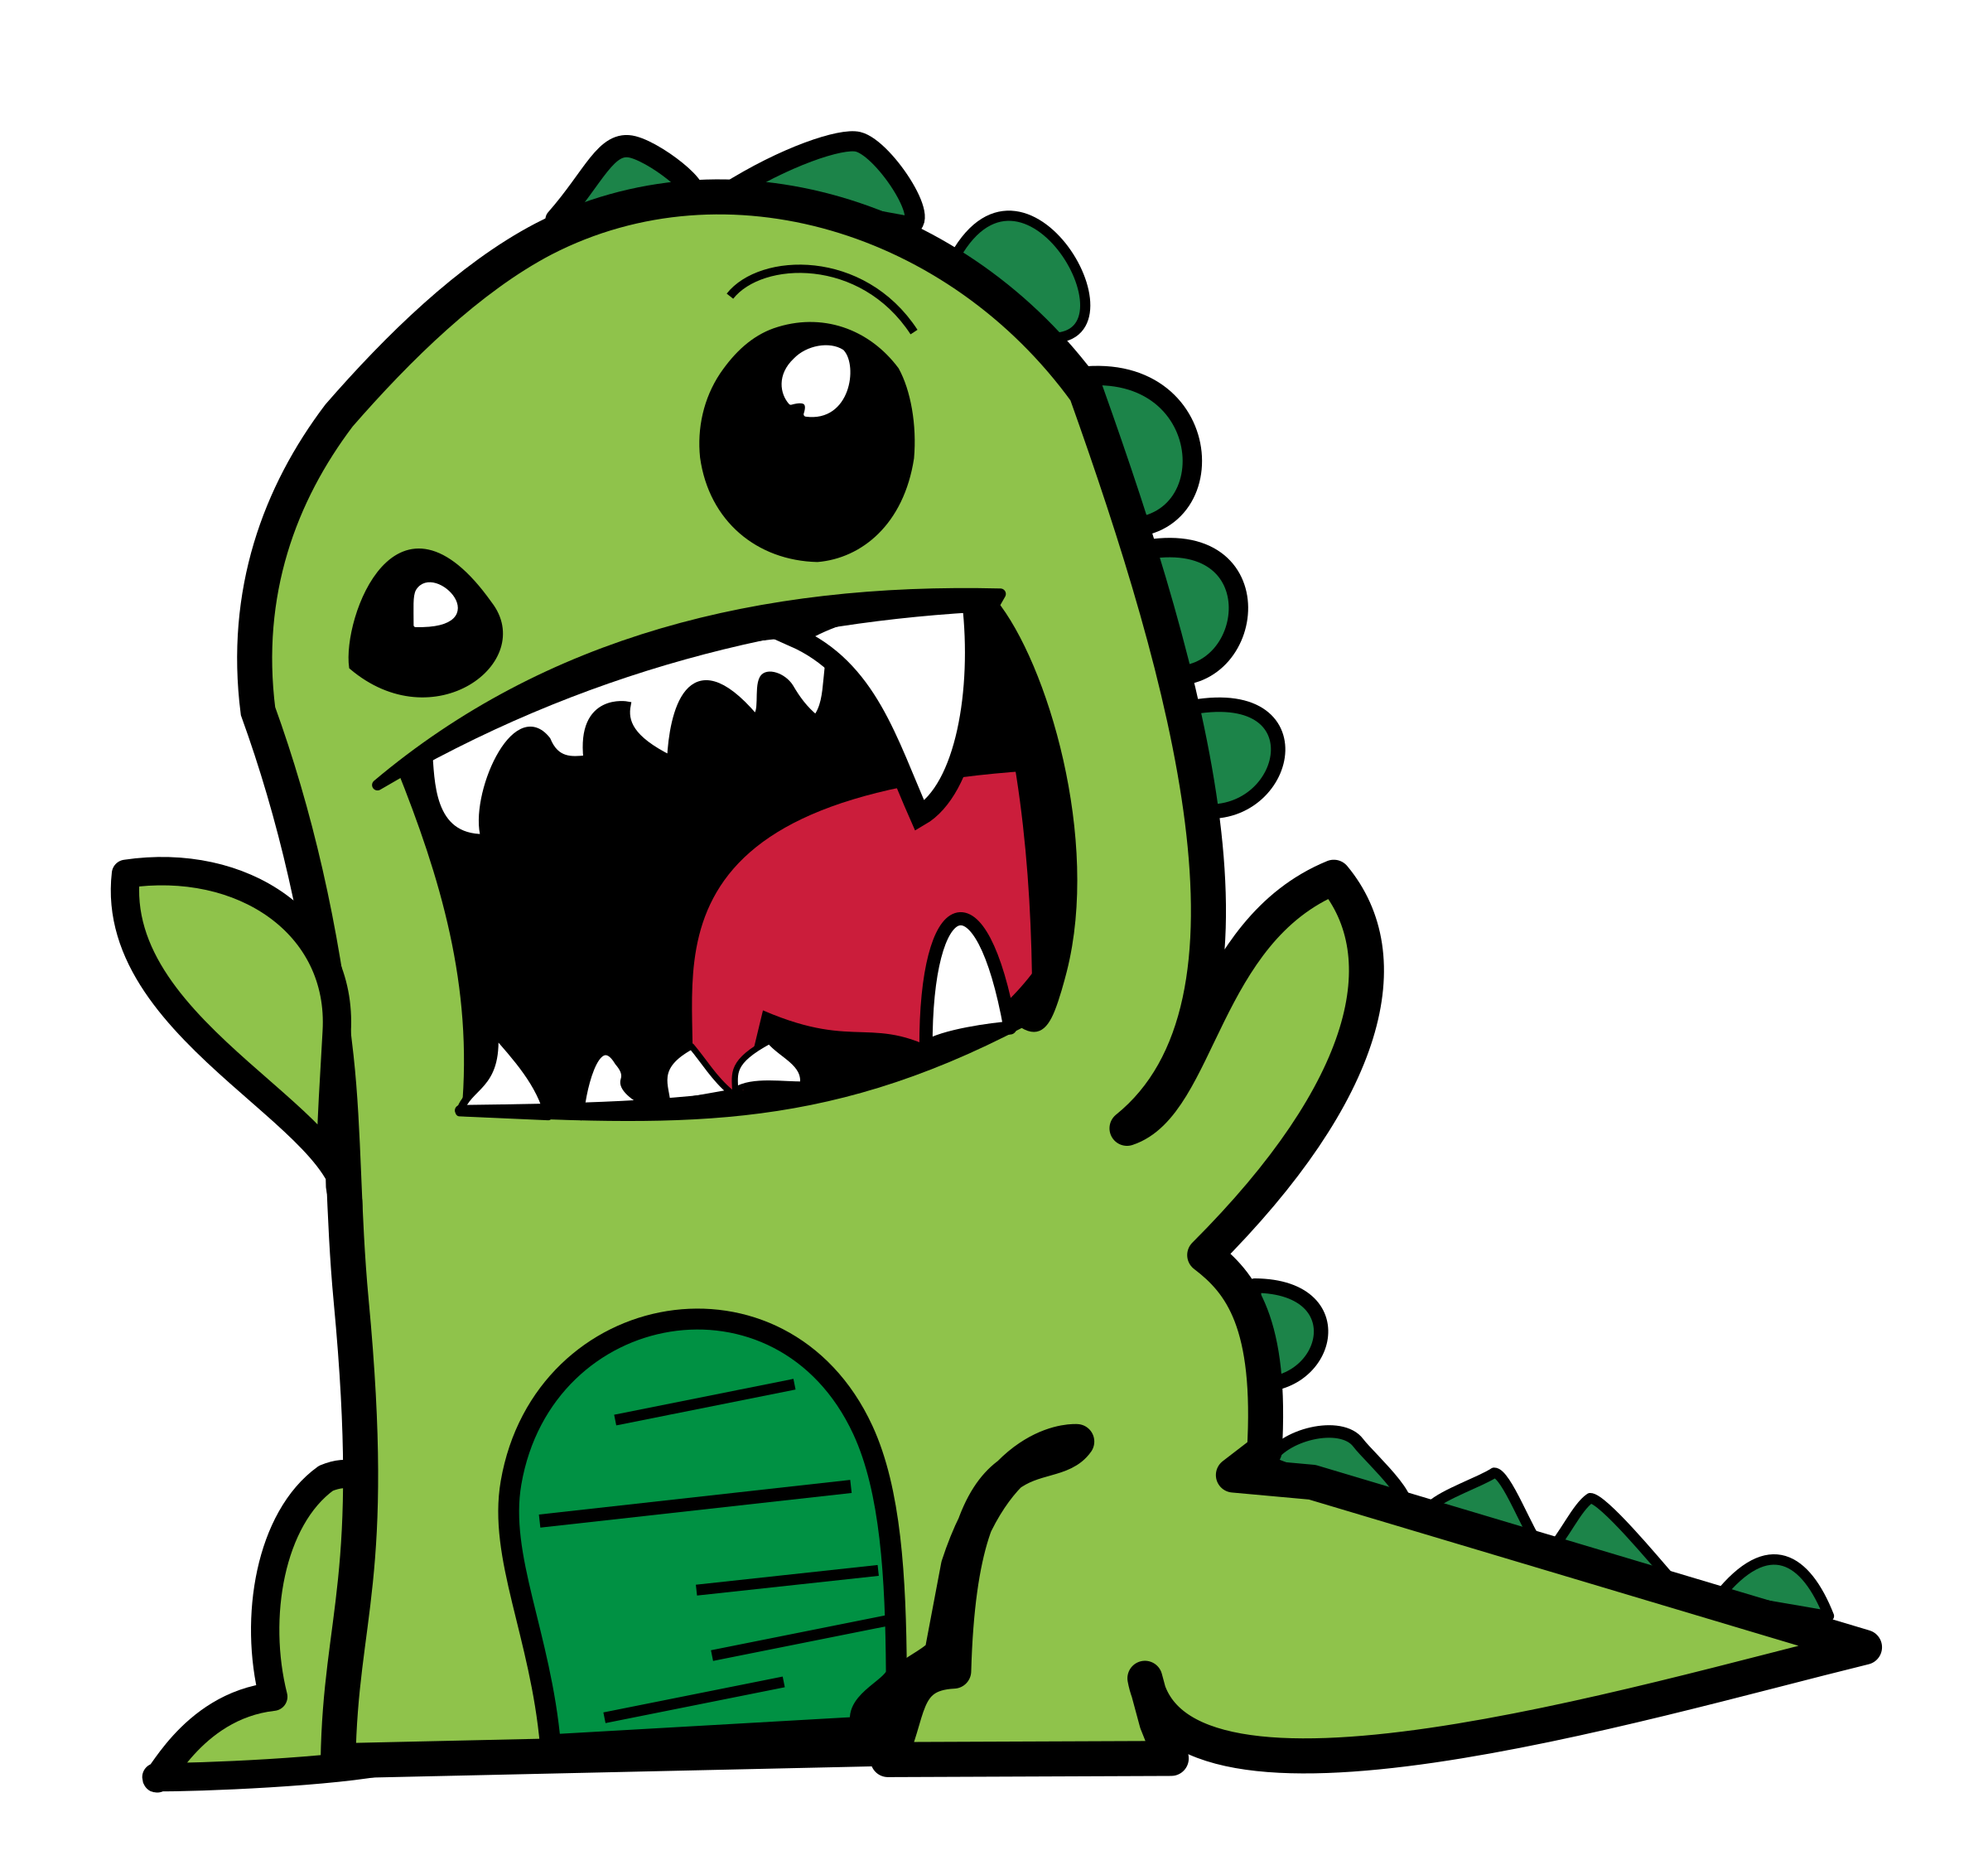 Download Rawr Dinosaur vector clipart image - Free stock photo ...